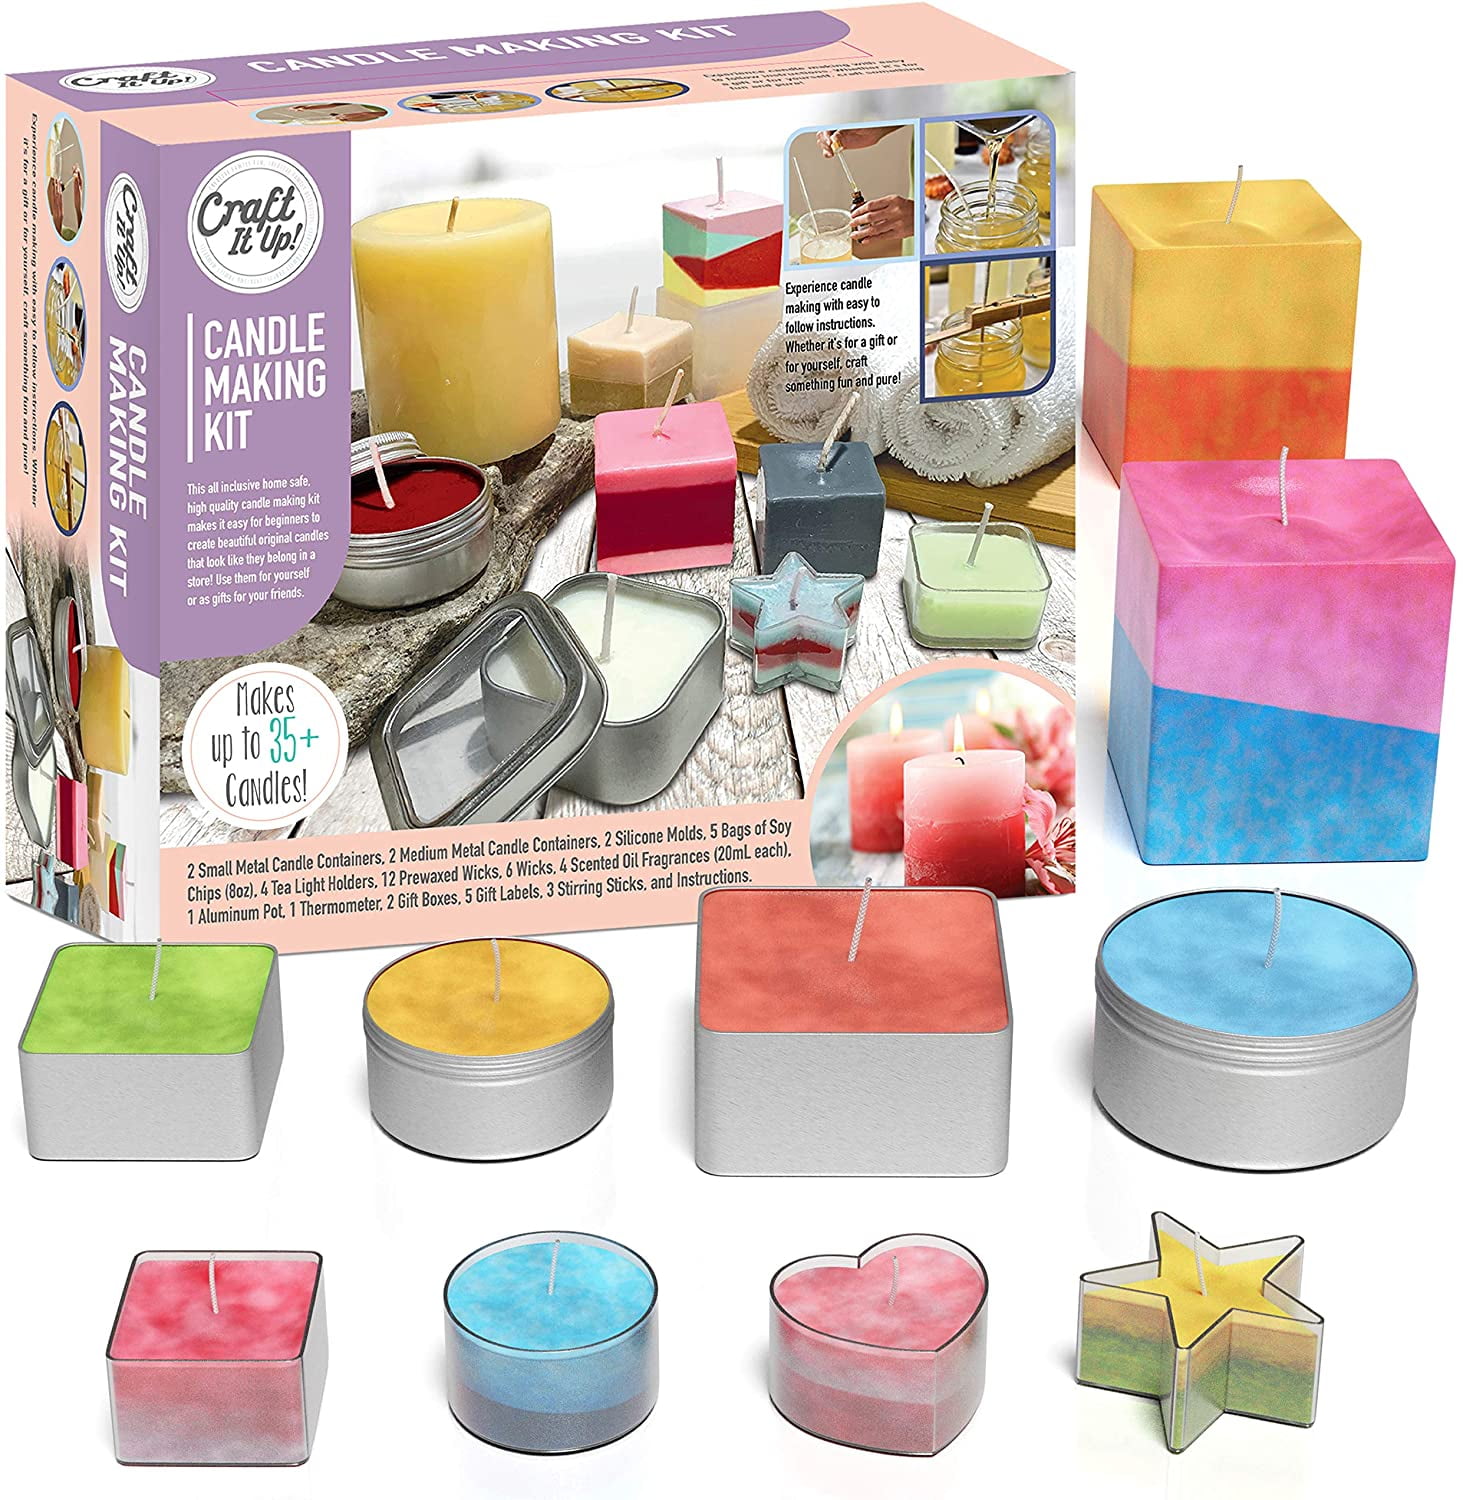 Wicks Rich Scents Tins & More Dyes KYONANO Candle Making Kit Easy to Make Colored Candle Soy Wax Kit Include Wax